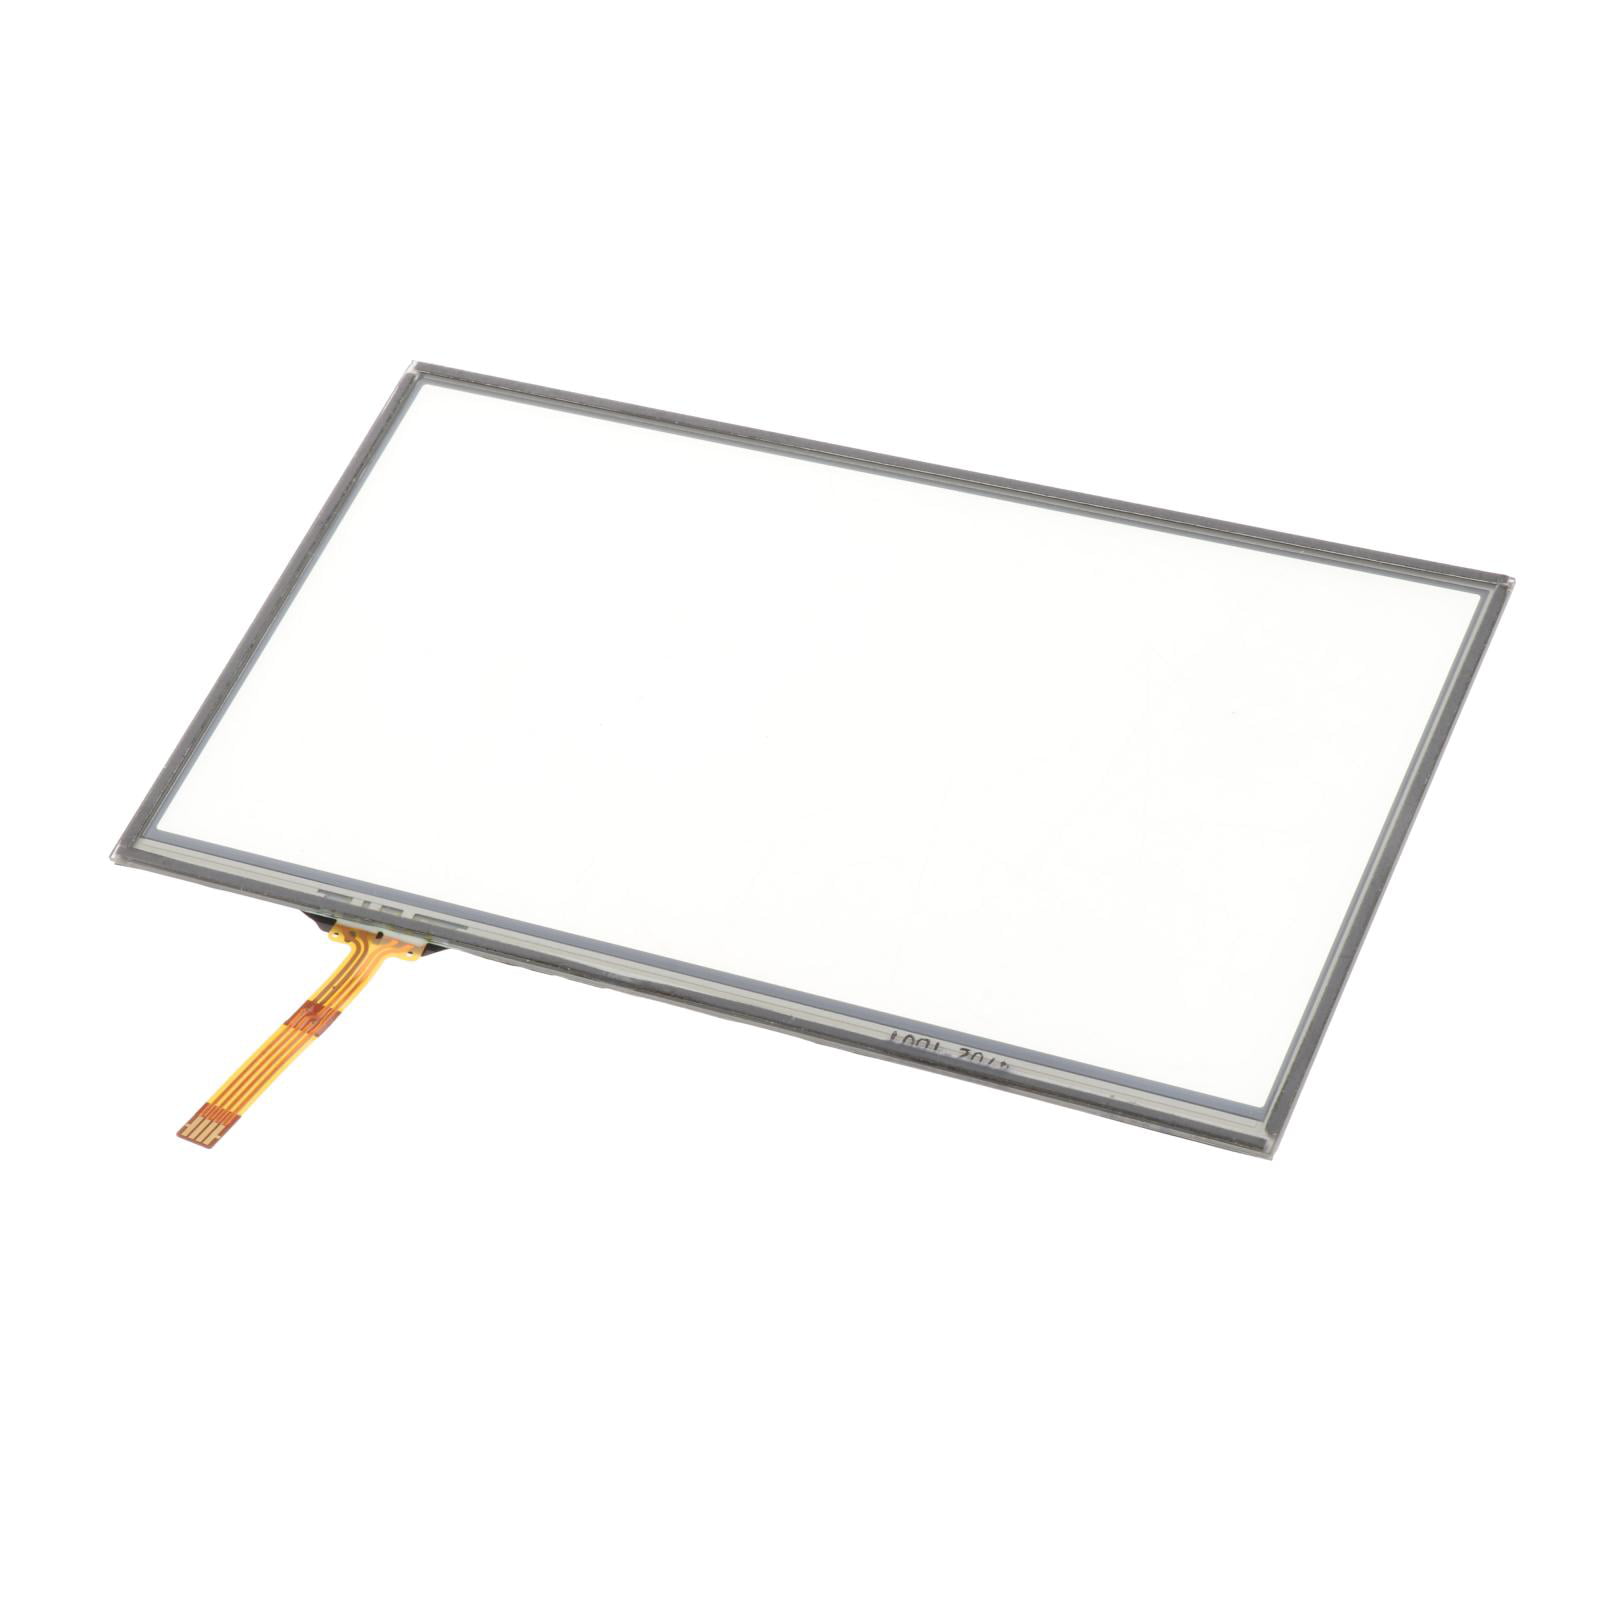 New 7 inch Touch Screen Panel Digitizer Glass For C109188A1-DRFPC208T-V4.0 